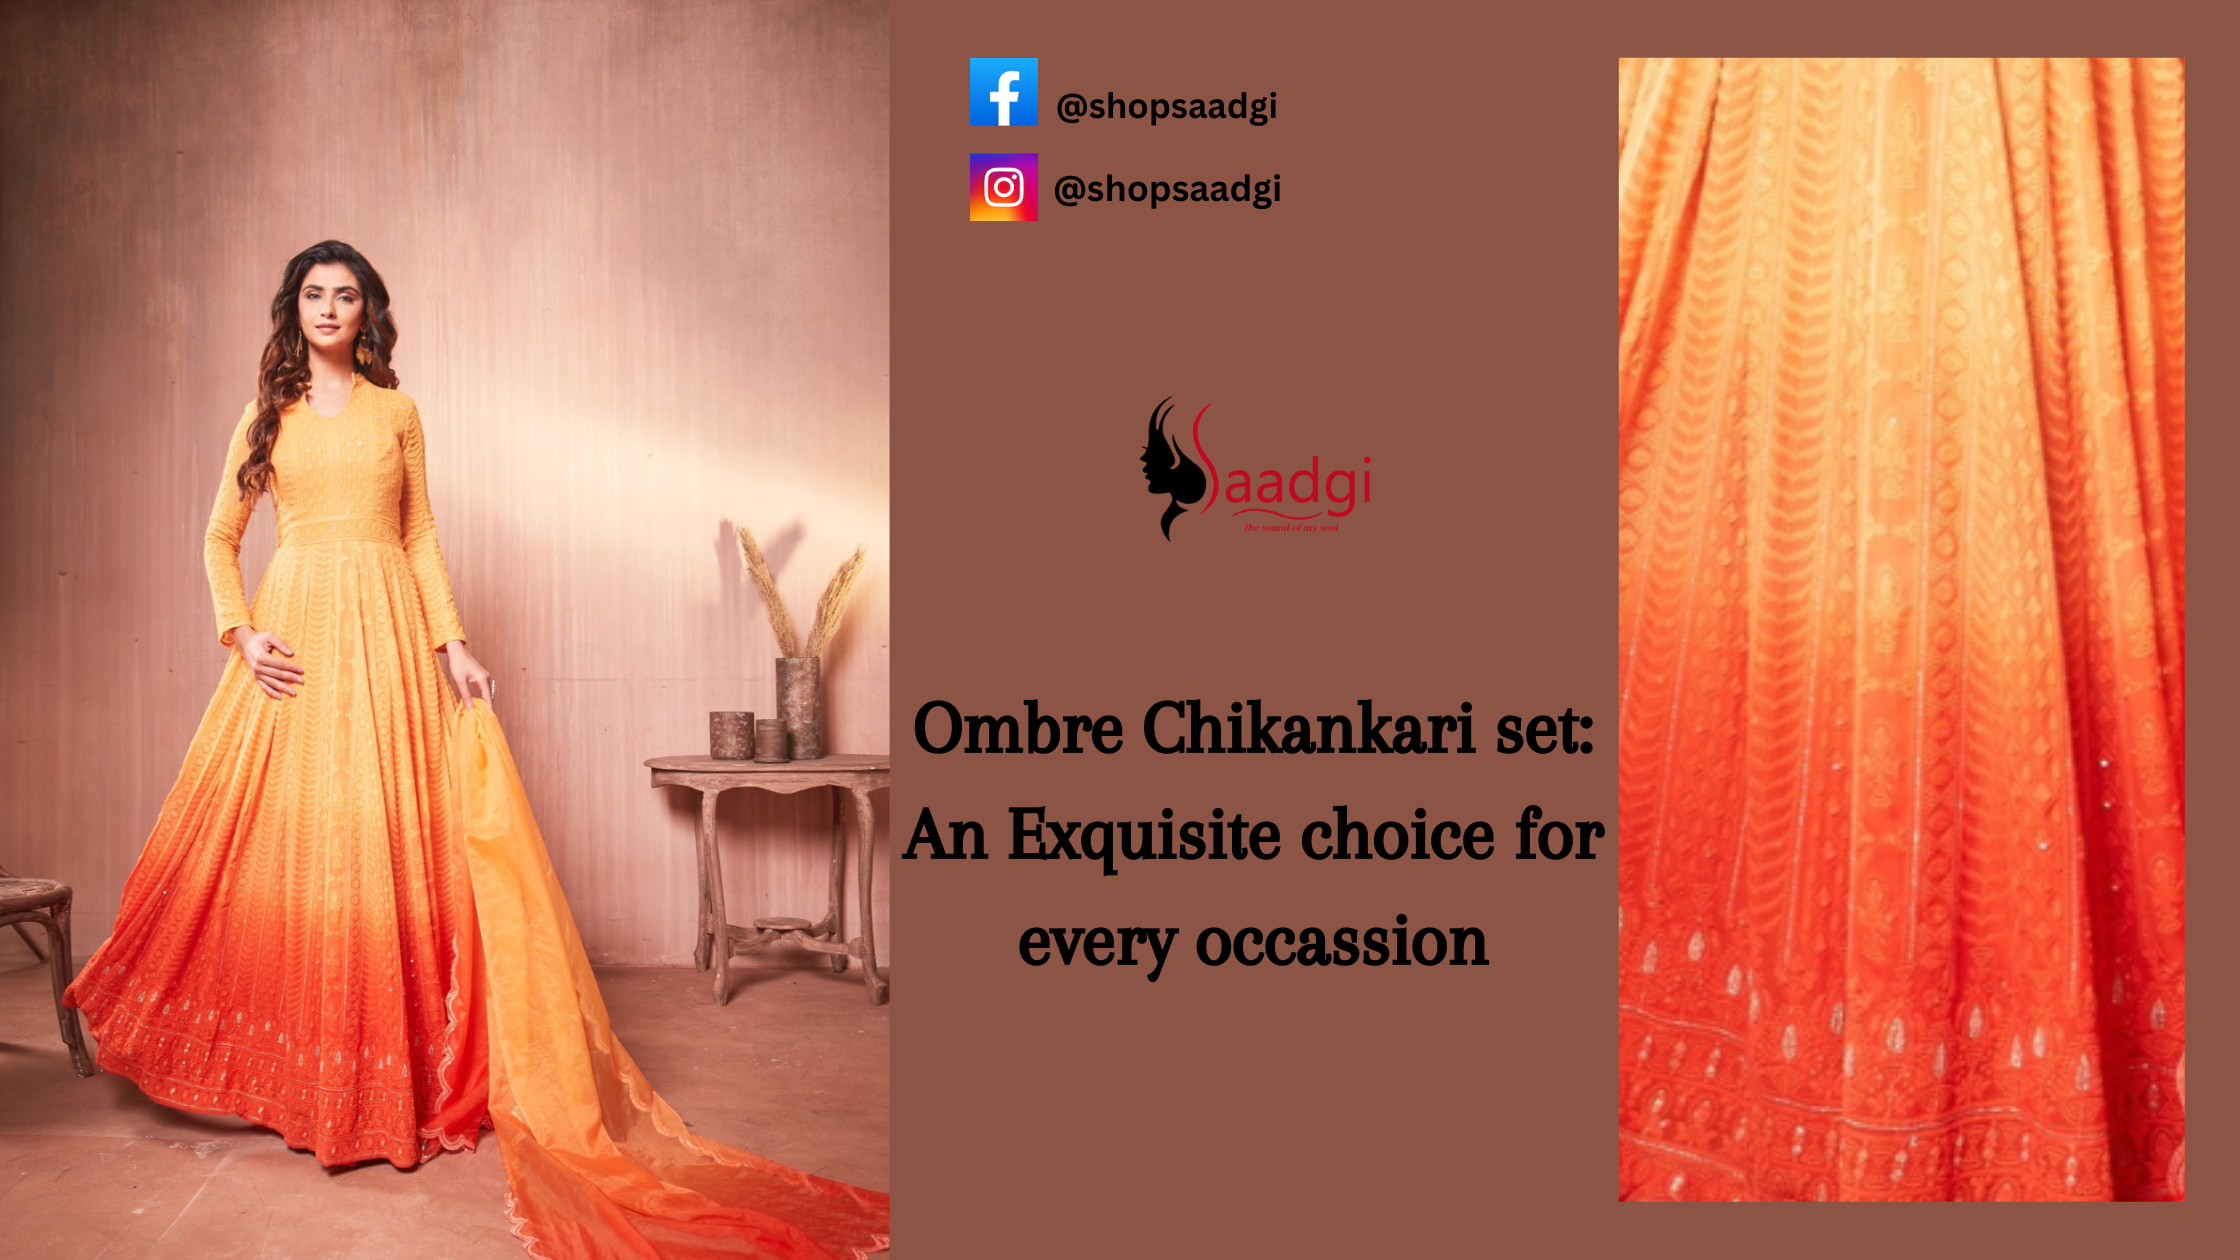 Ombre Chikankari kurta set:An Exquisite choice for every occasion